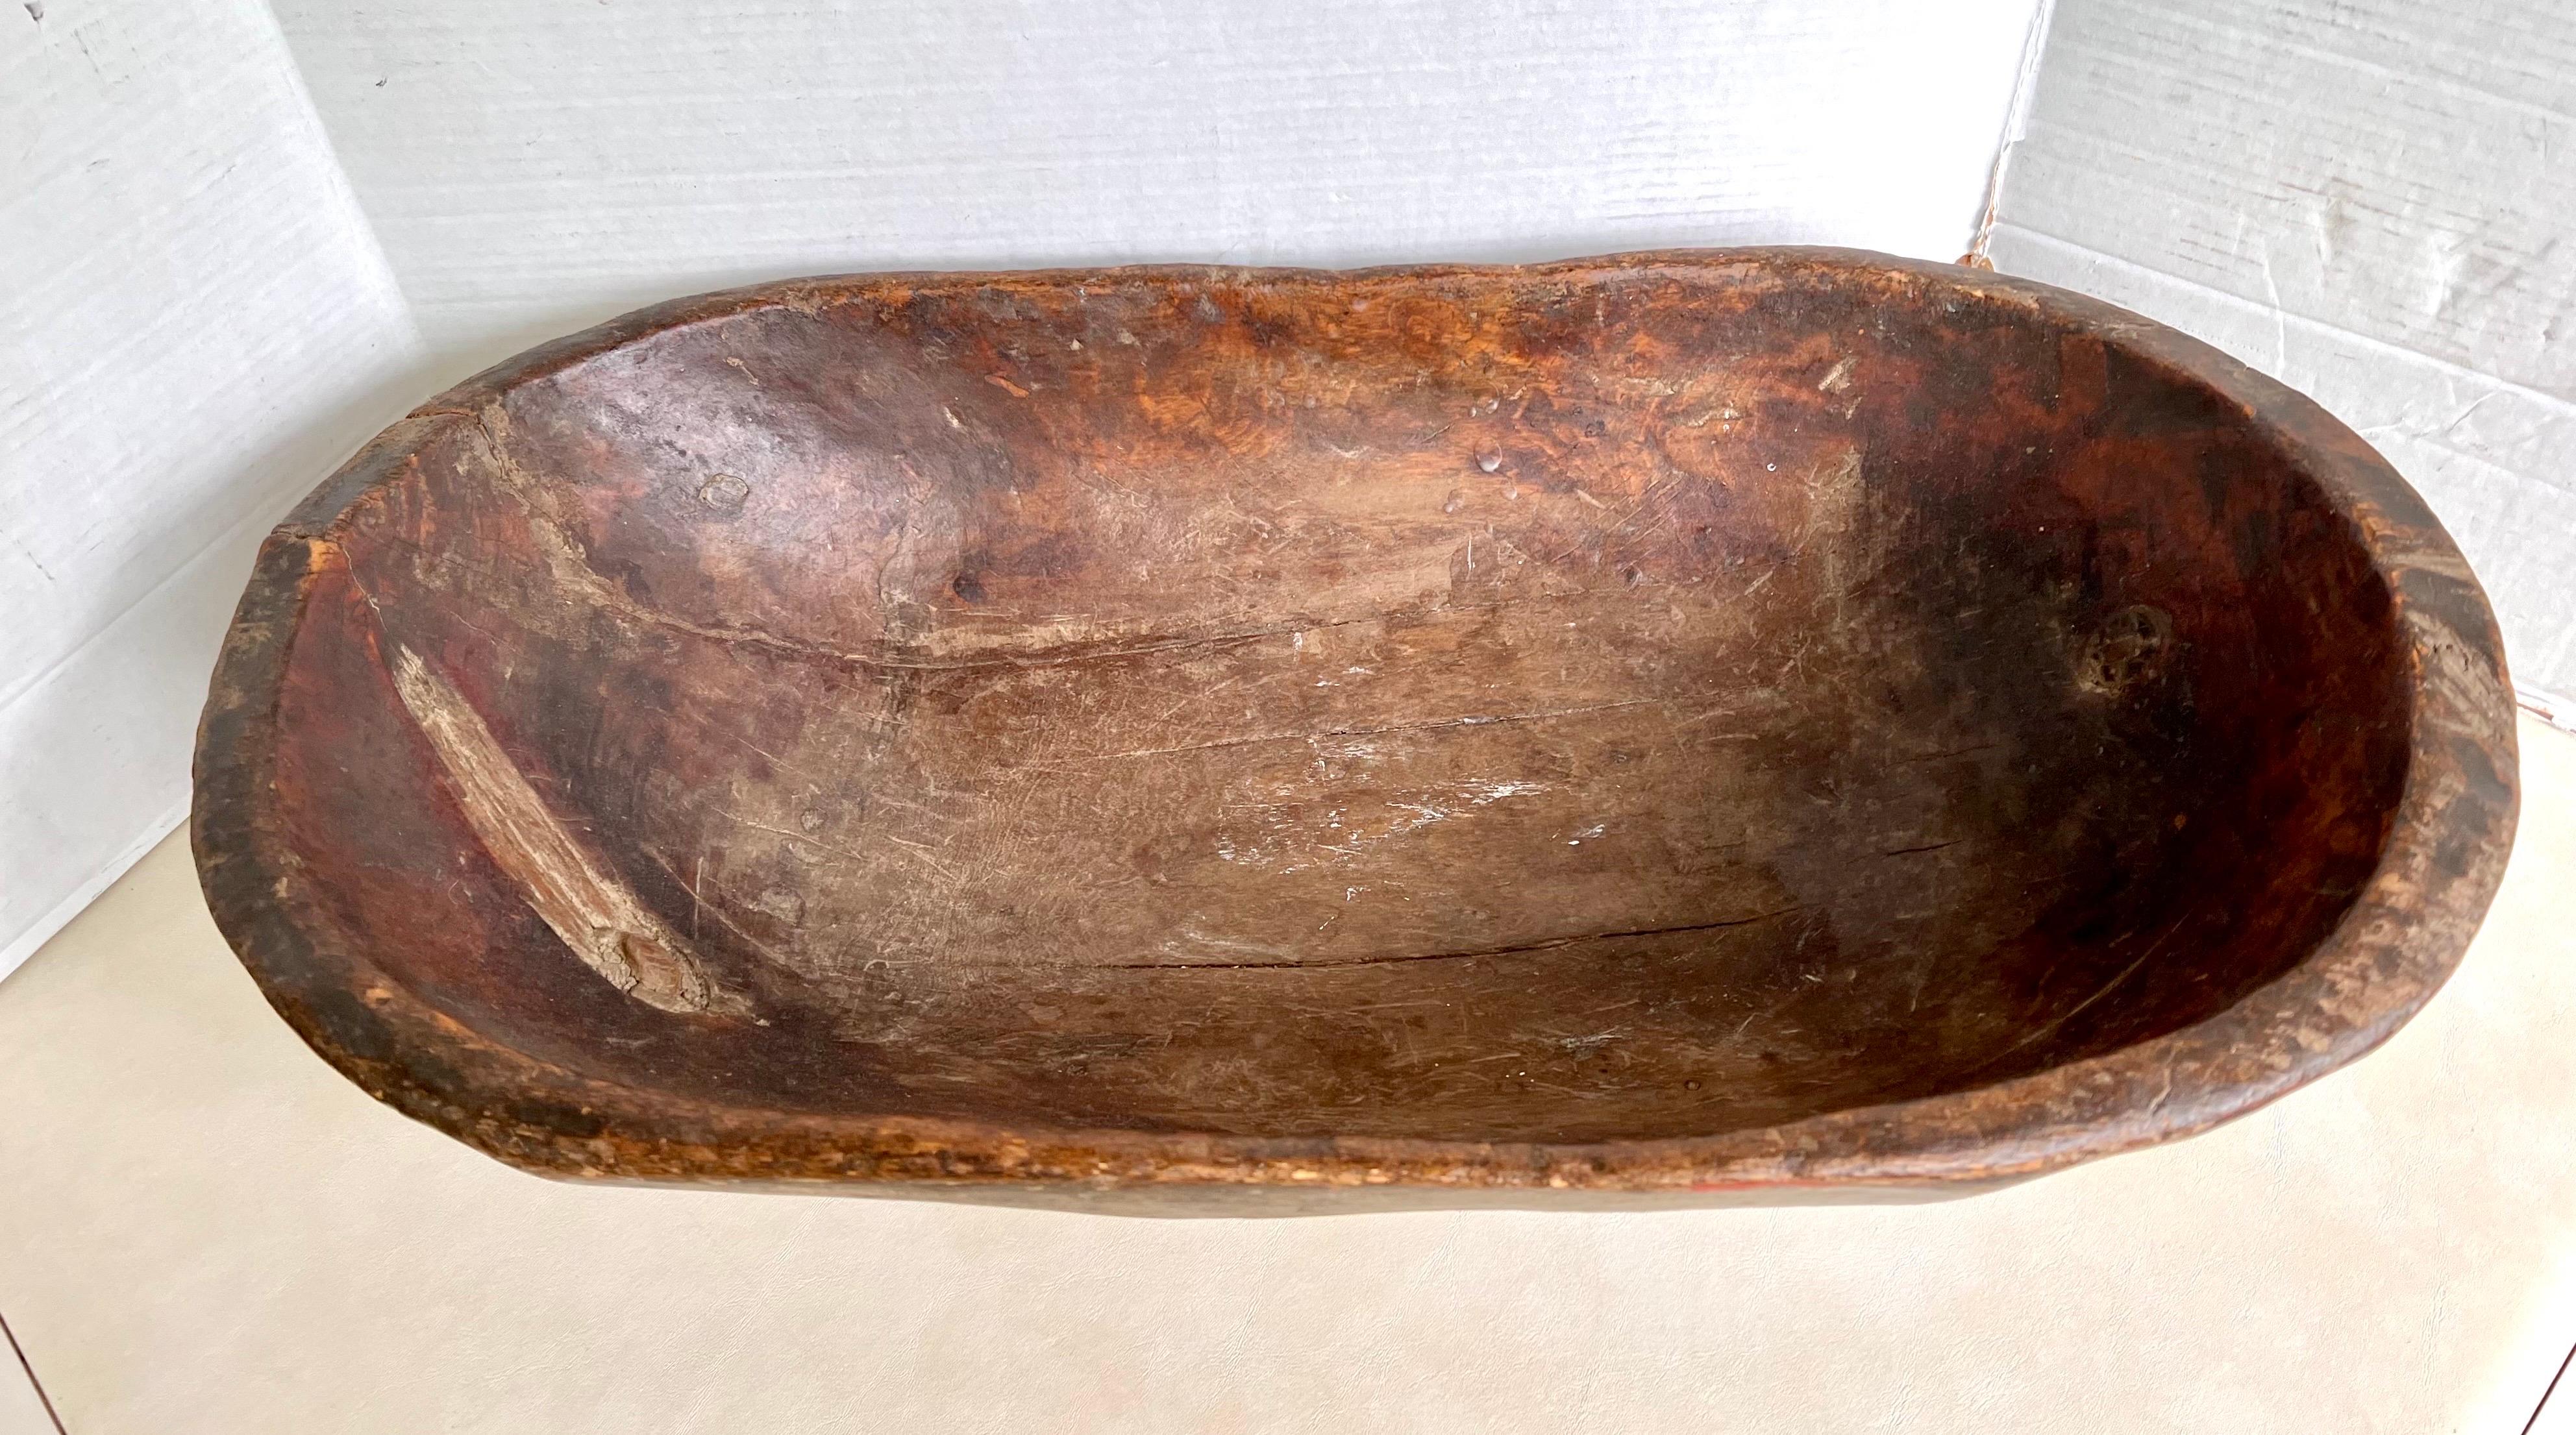 Handcrafted large wooden dough bowl hand carved from one piece of wood. Has a beautiful patina only acquired through its age and use.